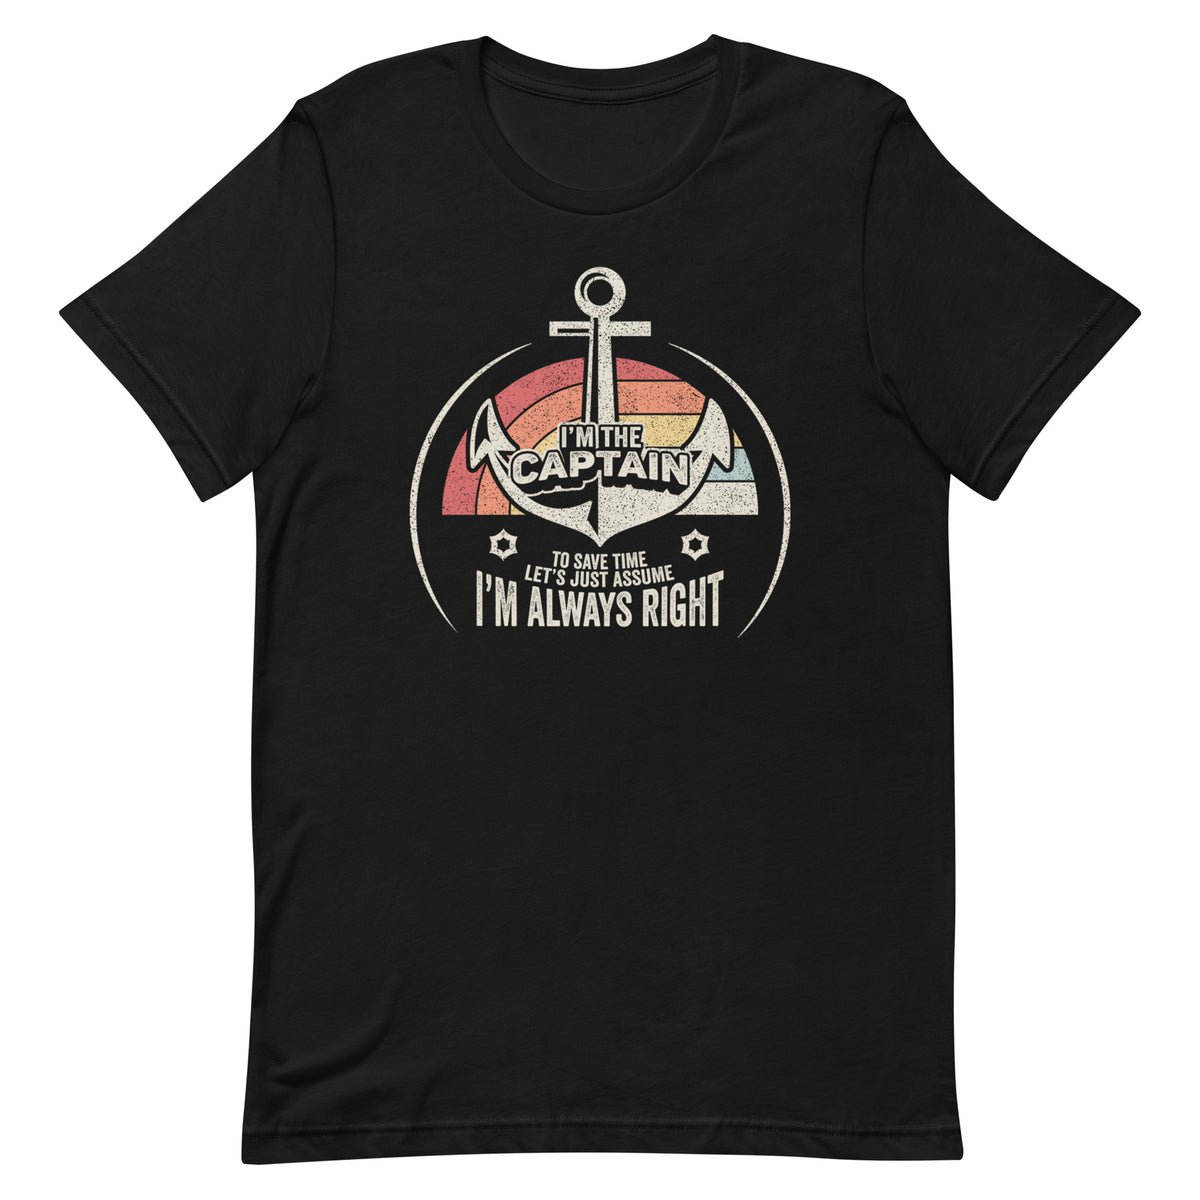 I'm The Captain Of The Boat To Save Time Let's Just Assume I'm Always Right Unisex t-shirt